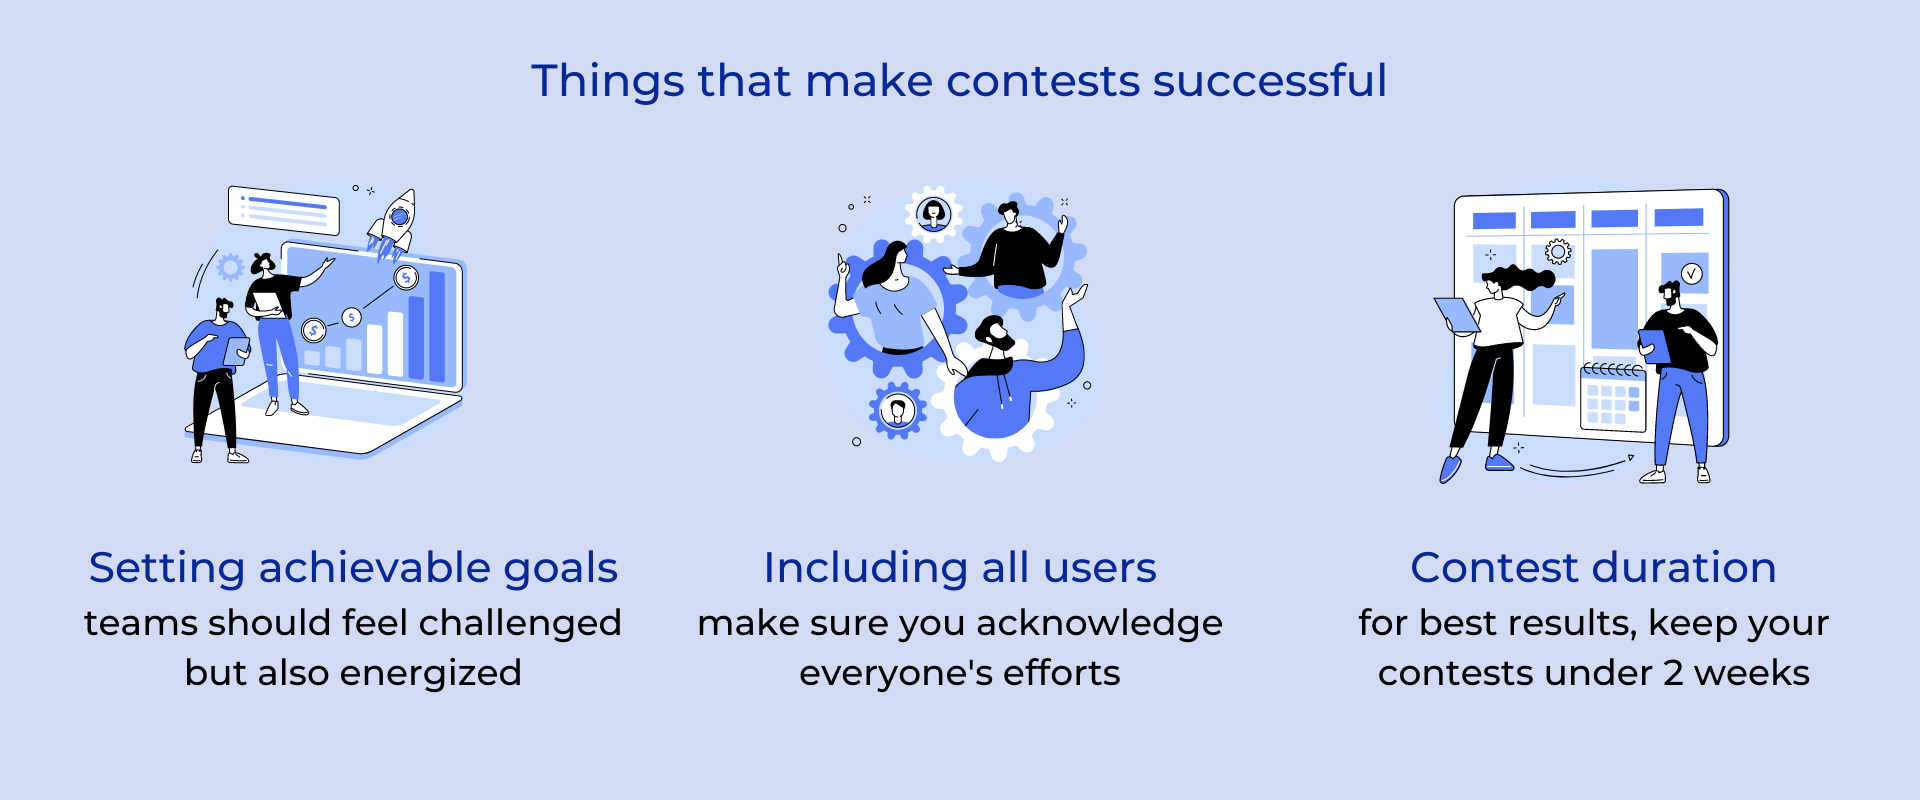 5 contest ideas for motivating sales teams